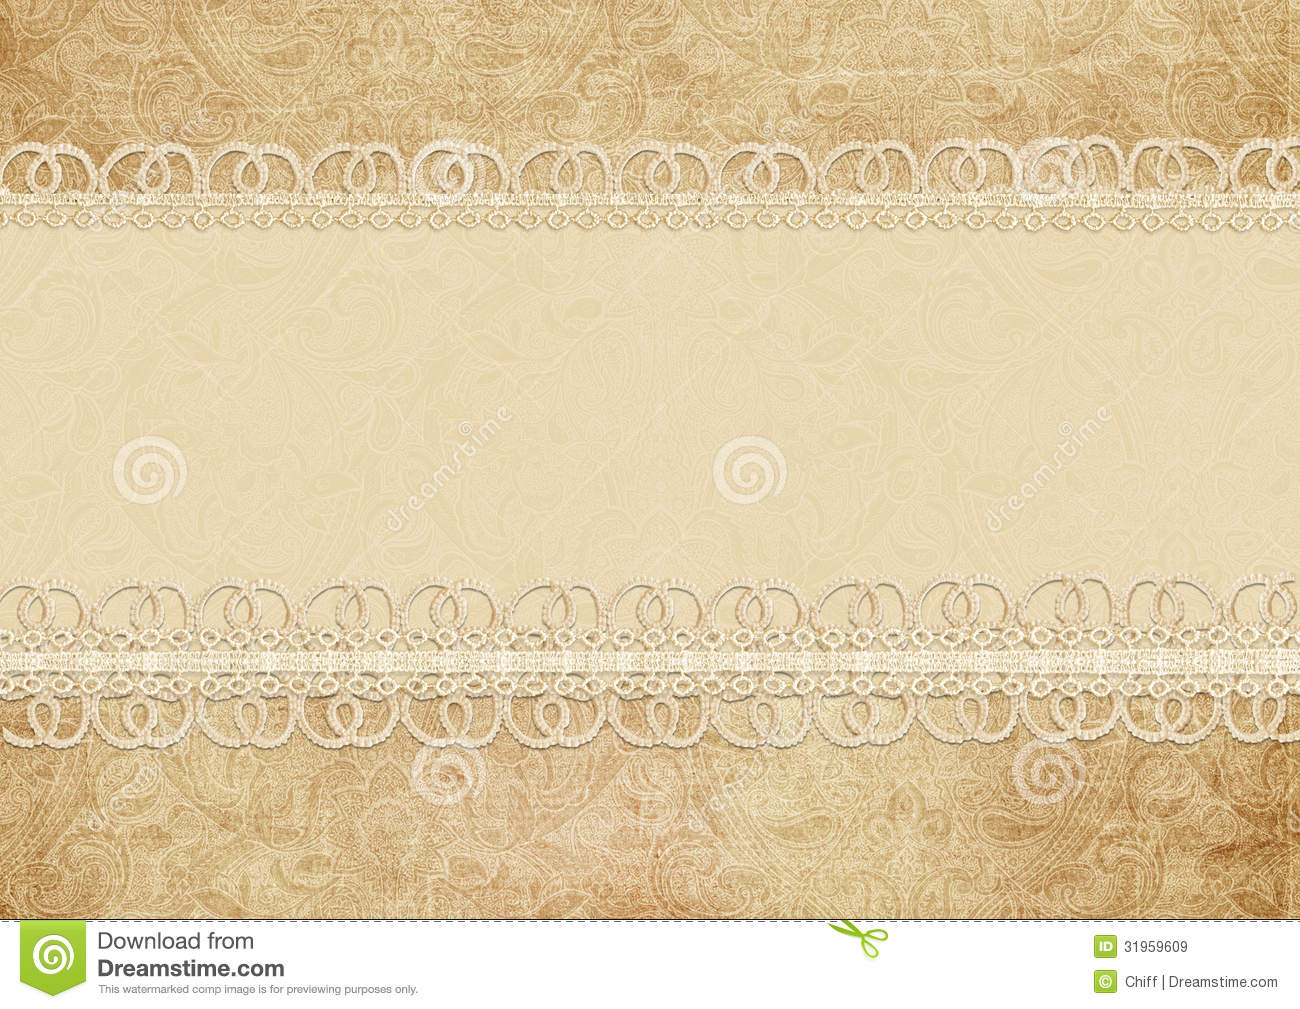 Vintage Backgrounds with Lace